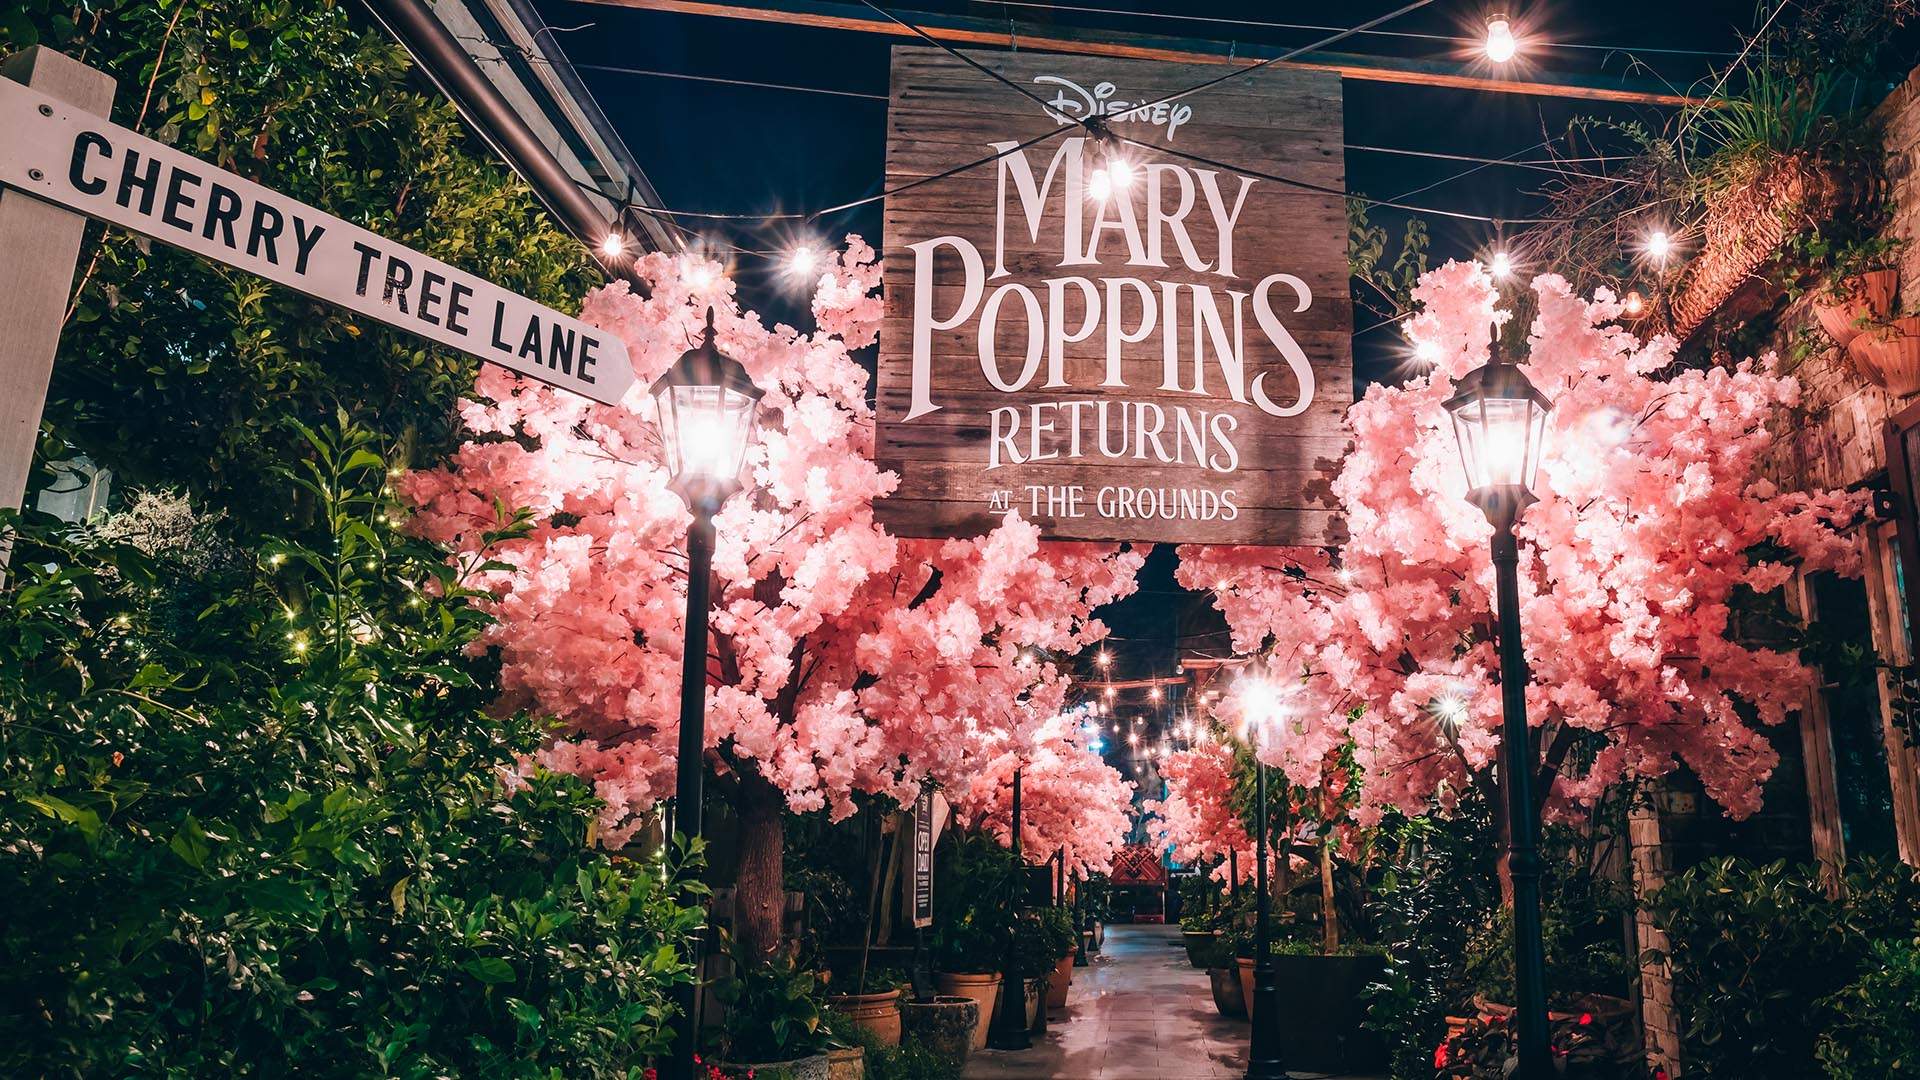 'Mary Poppins Returns' at The Grounds